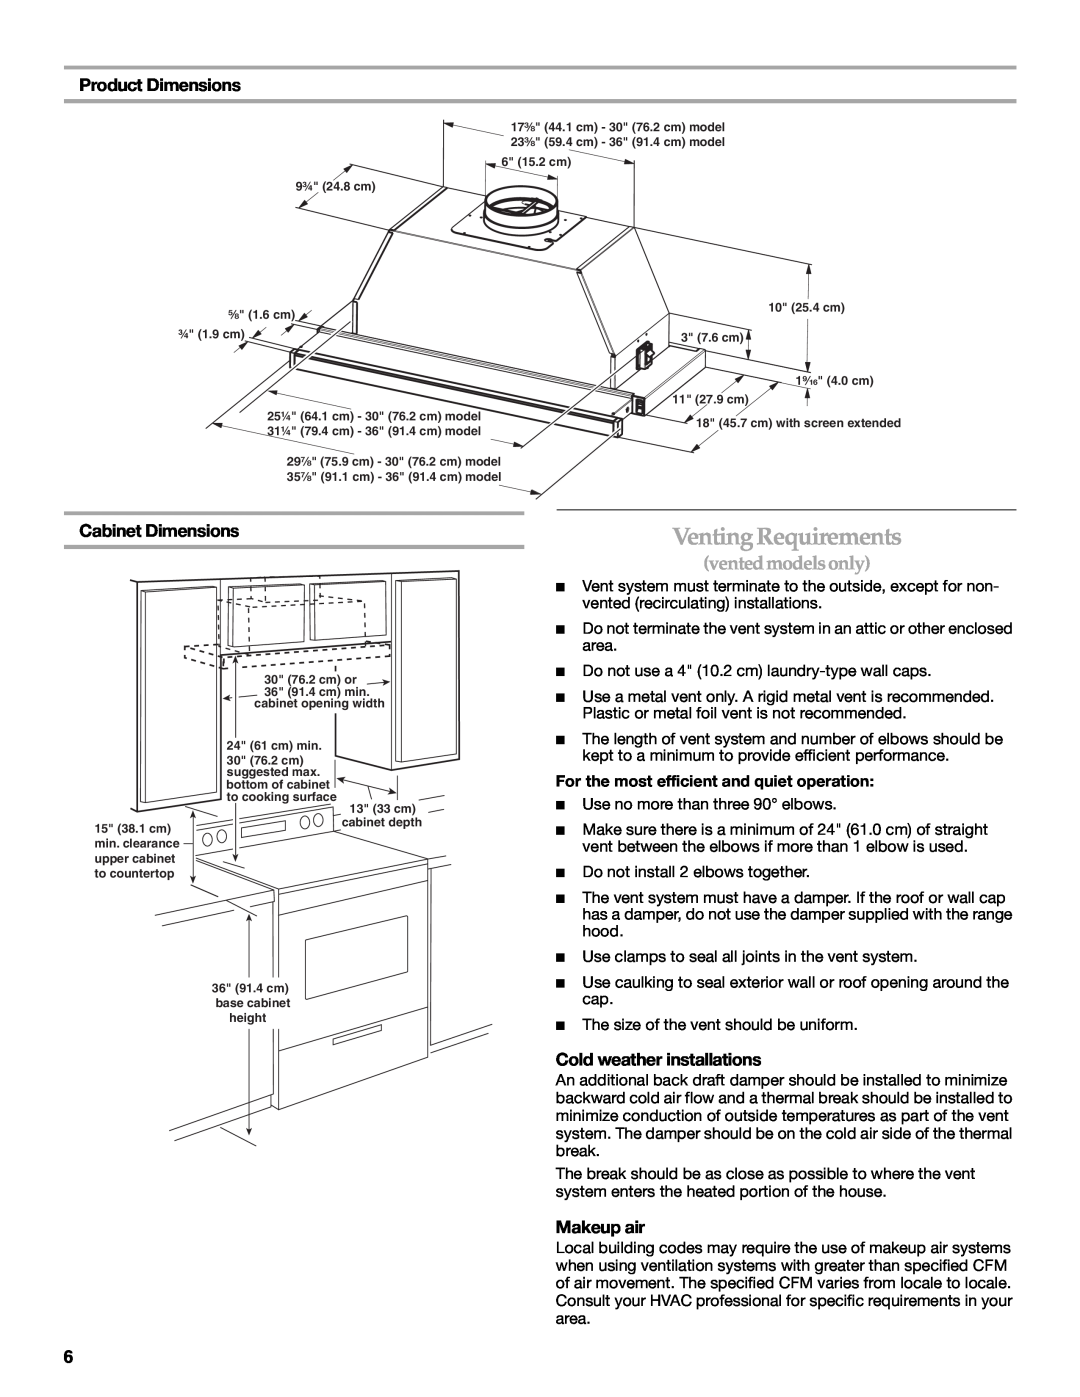 KitchenAid W10267109C Product Dimensions, Cabinet Dimensions, Cold weather installations, Makeup air, VentingRequirements 